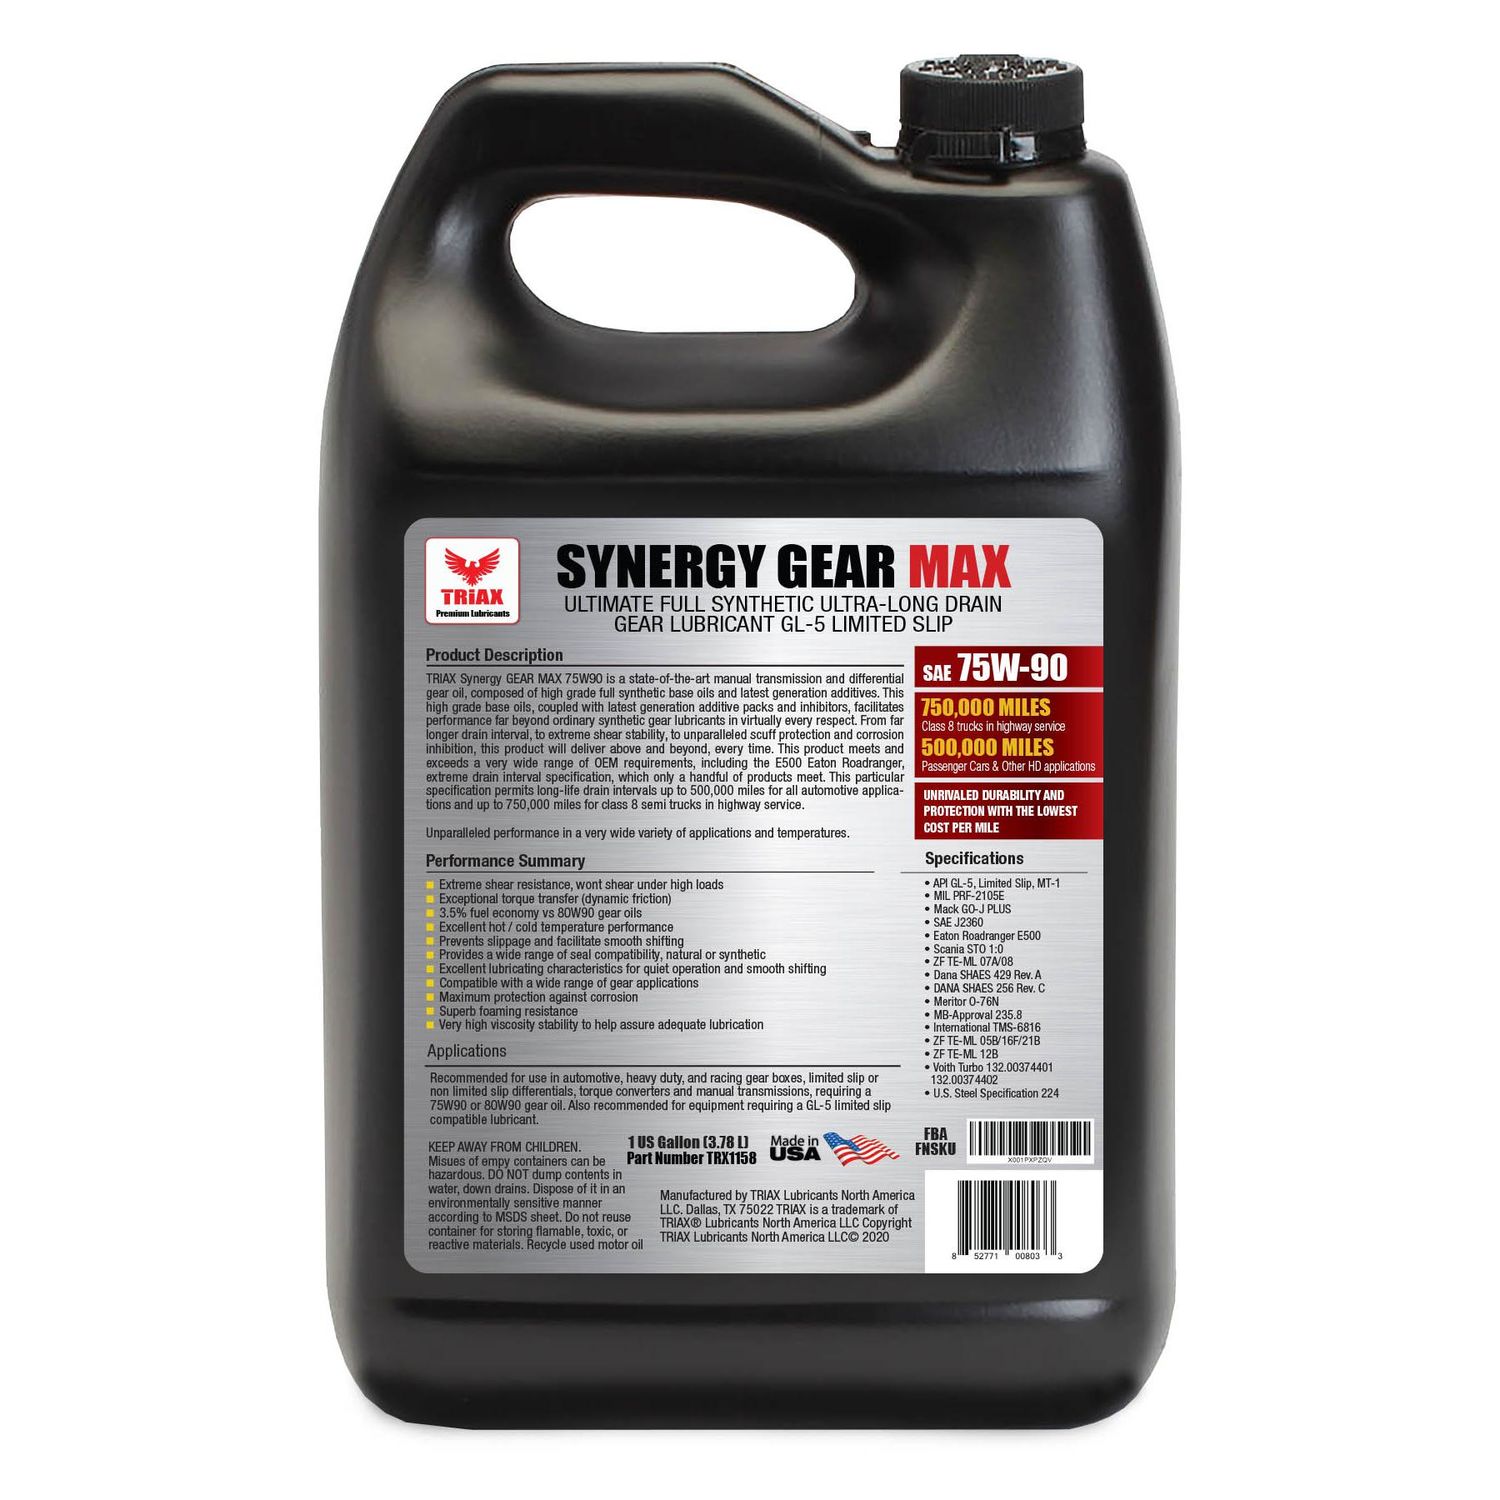 MOBIL 1 SYN GEAR LUBE LS 75W-90 - Perfomance Lube - Lubricantes